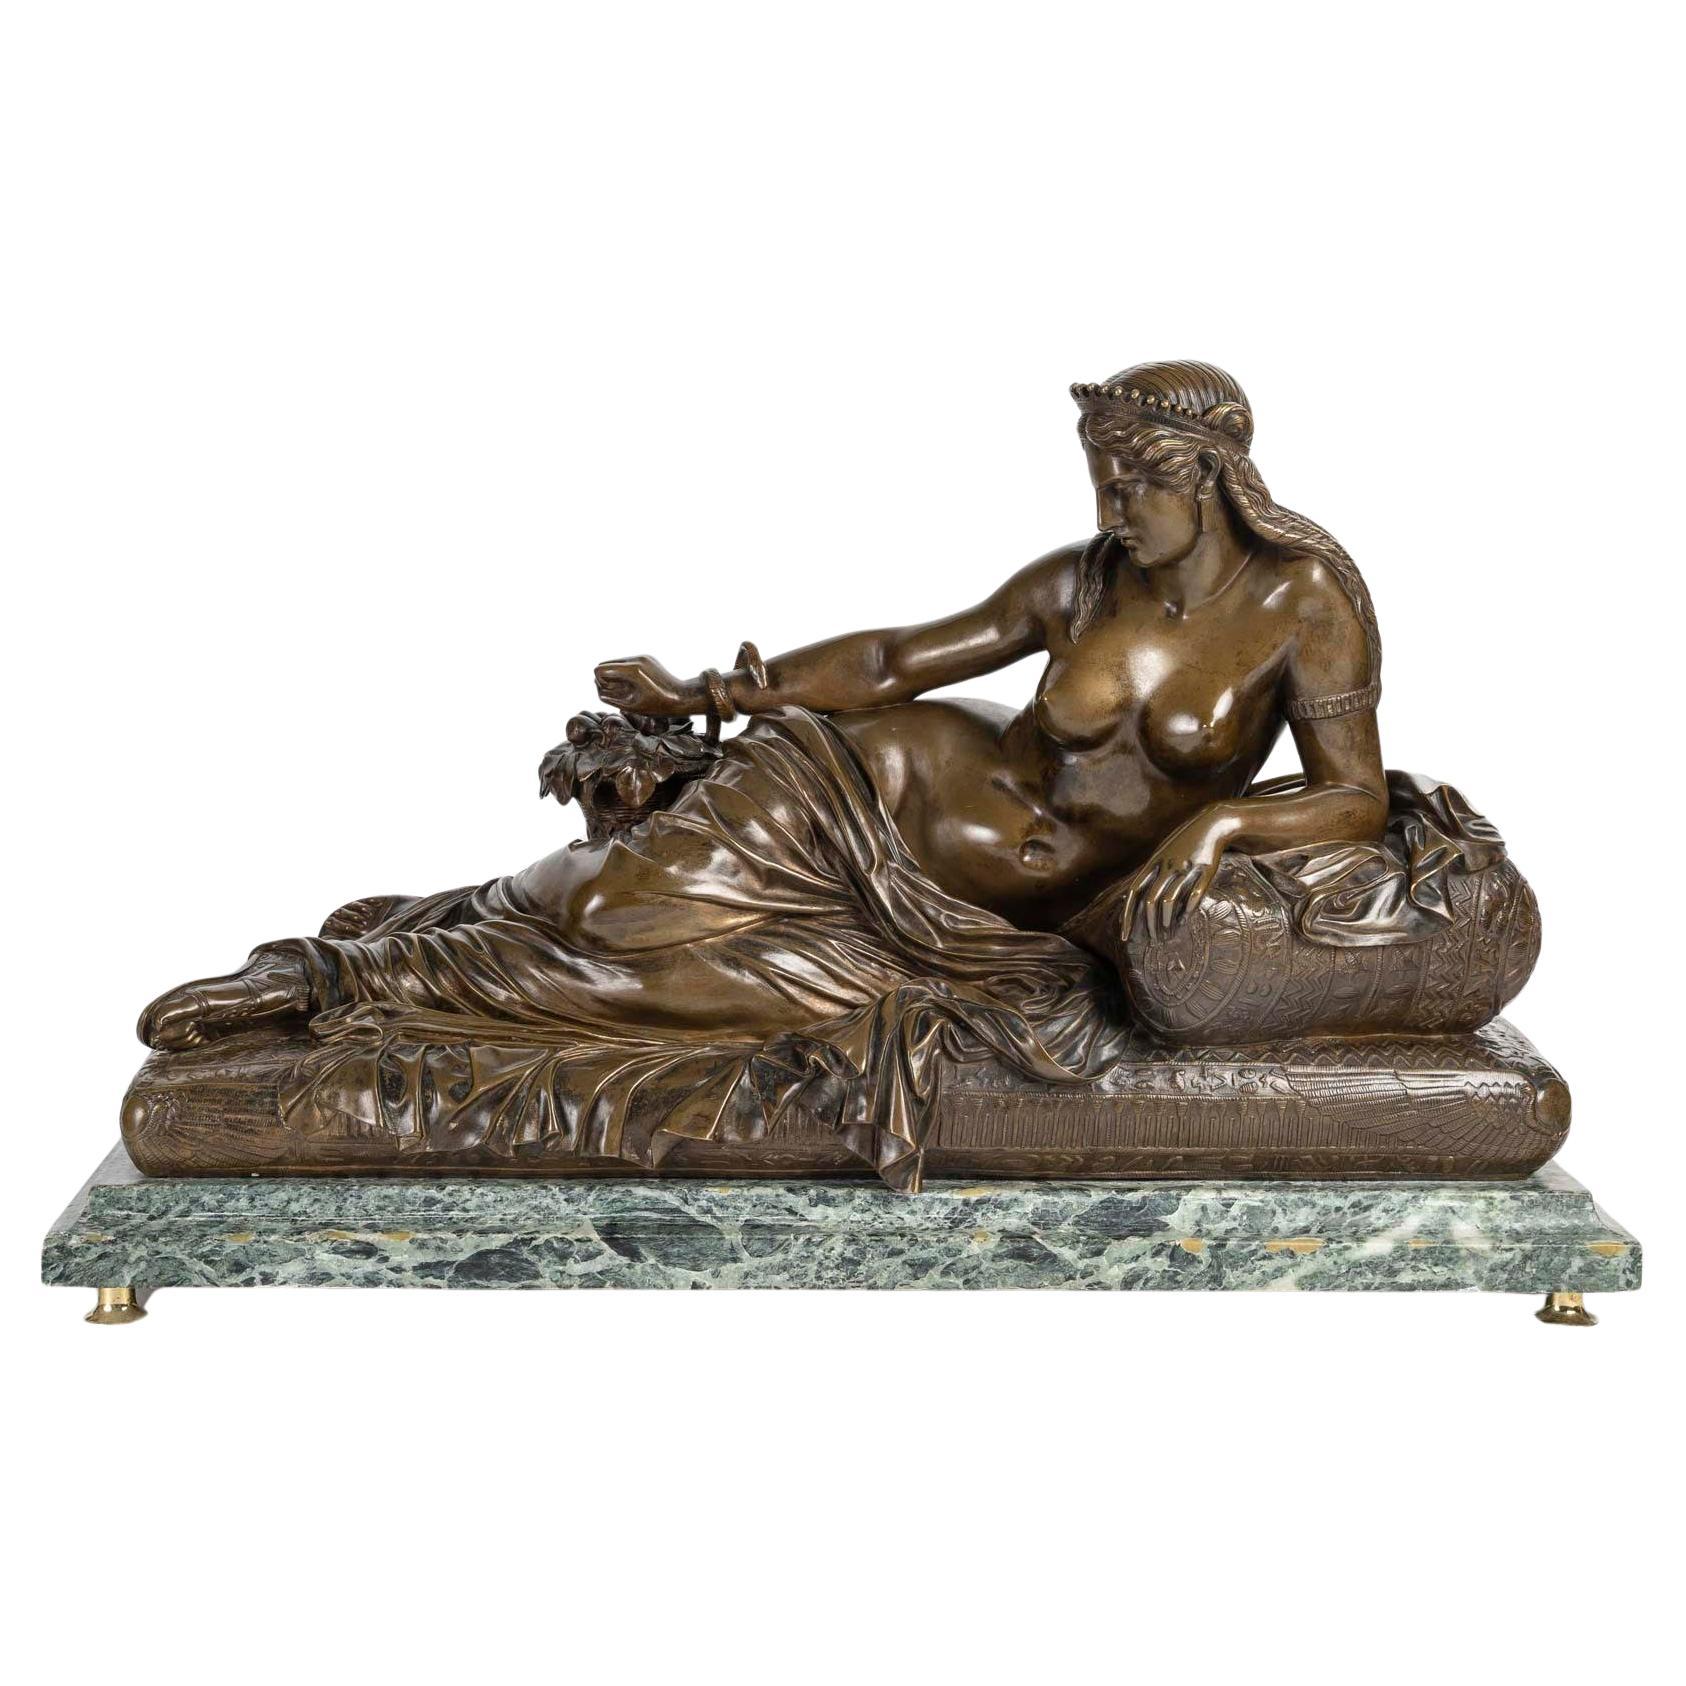 Sculpture of Cleopatra Reclining, Sculpture Signed Barbedienne, Napoleon Period.